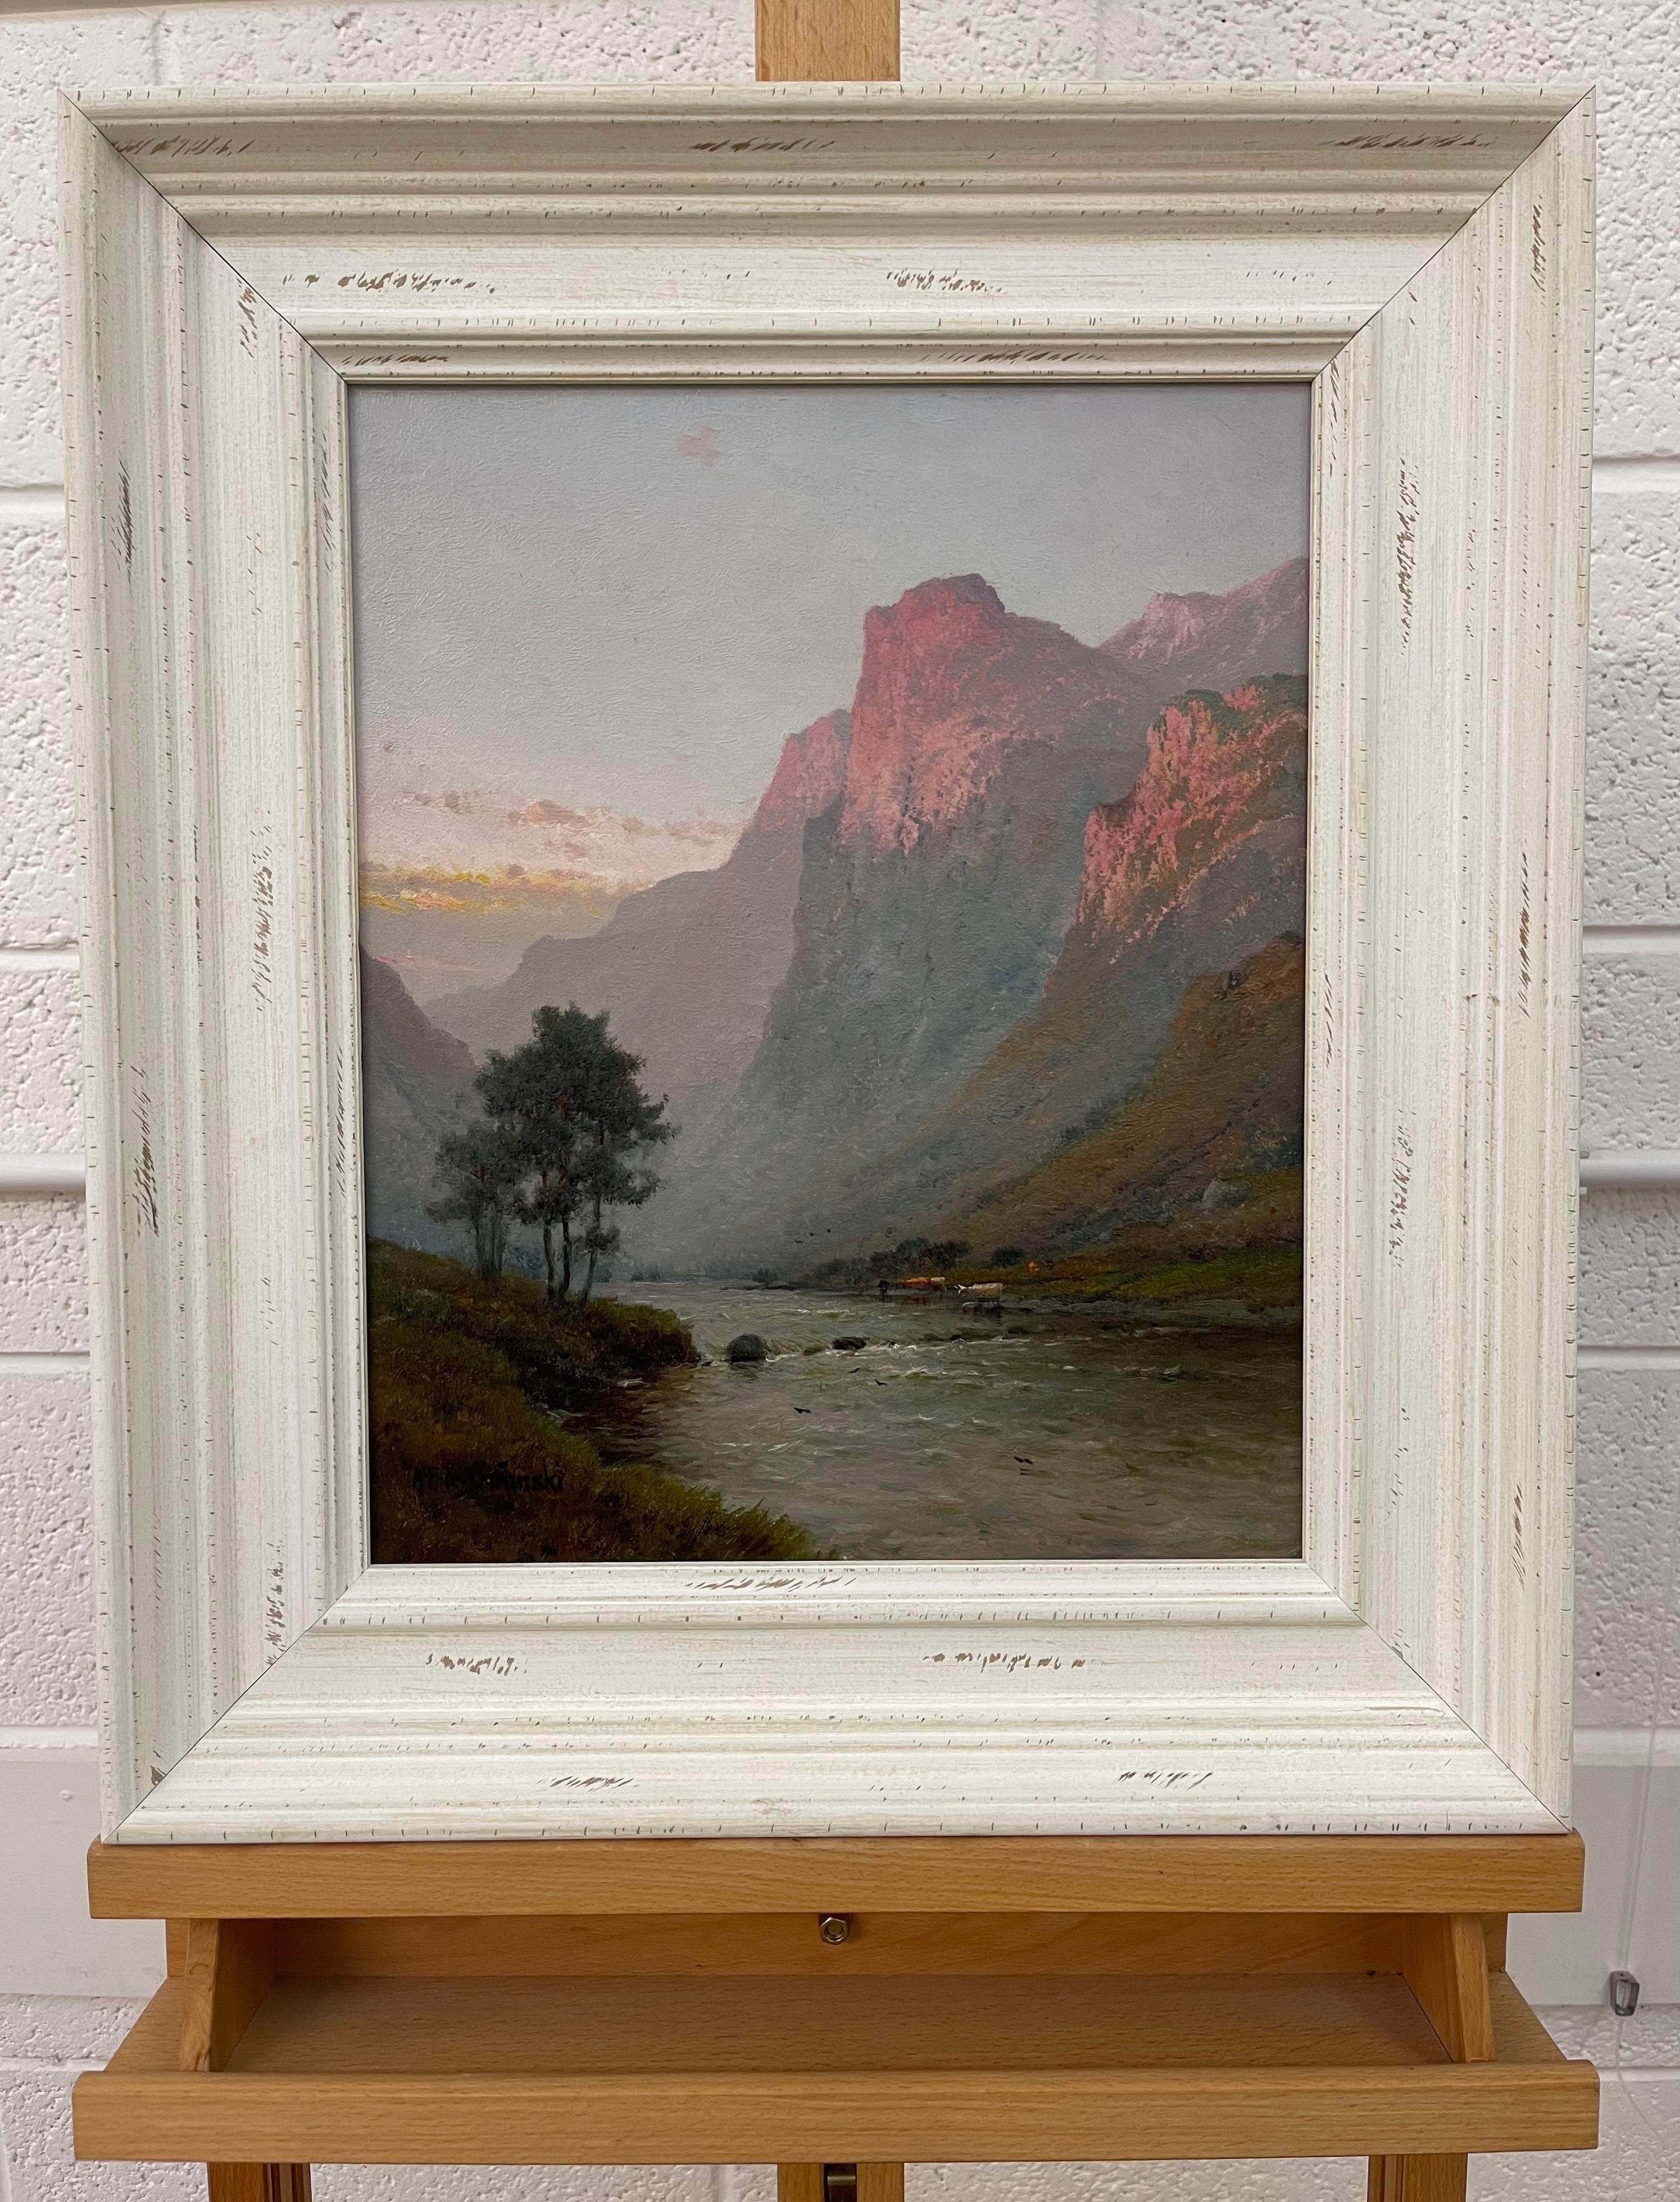 Mountain Landscape Painting of Ben Venue in the Scottish Highlands by 19th Century British Artist, Alfred De Breanski Snr, (1852 - 1928). Signed on the front (lower left) and rear of the canvas. Framed in an off-white shabby-chic moulding. 

Art